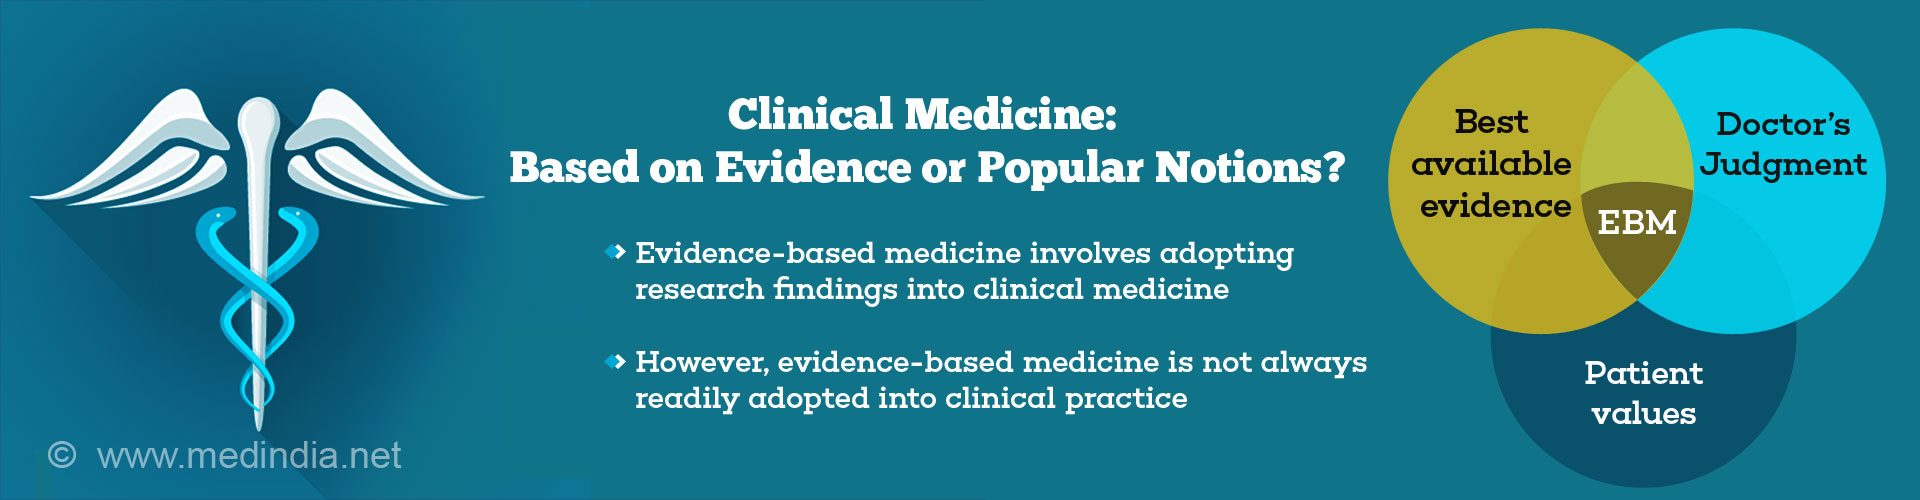 Clinical Medicine: Based on Evidence or Popular Notions?
- Evidence-based medicine involves adopting research findings into clinical medicine
- However, evidence-based medicine is not always readily adopted into clinical practice